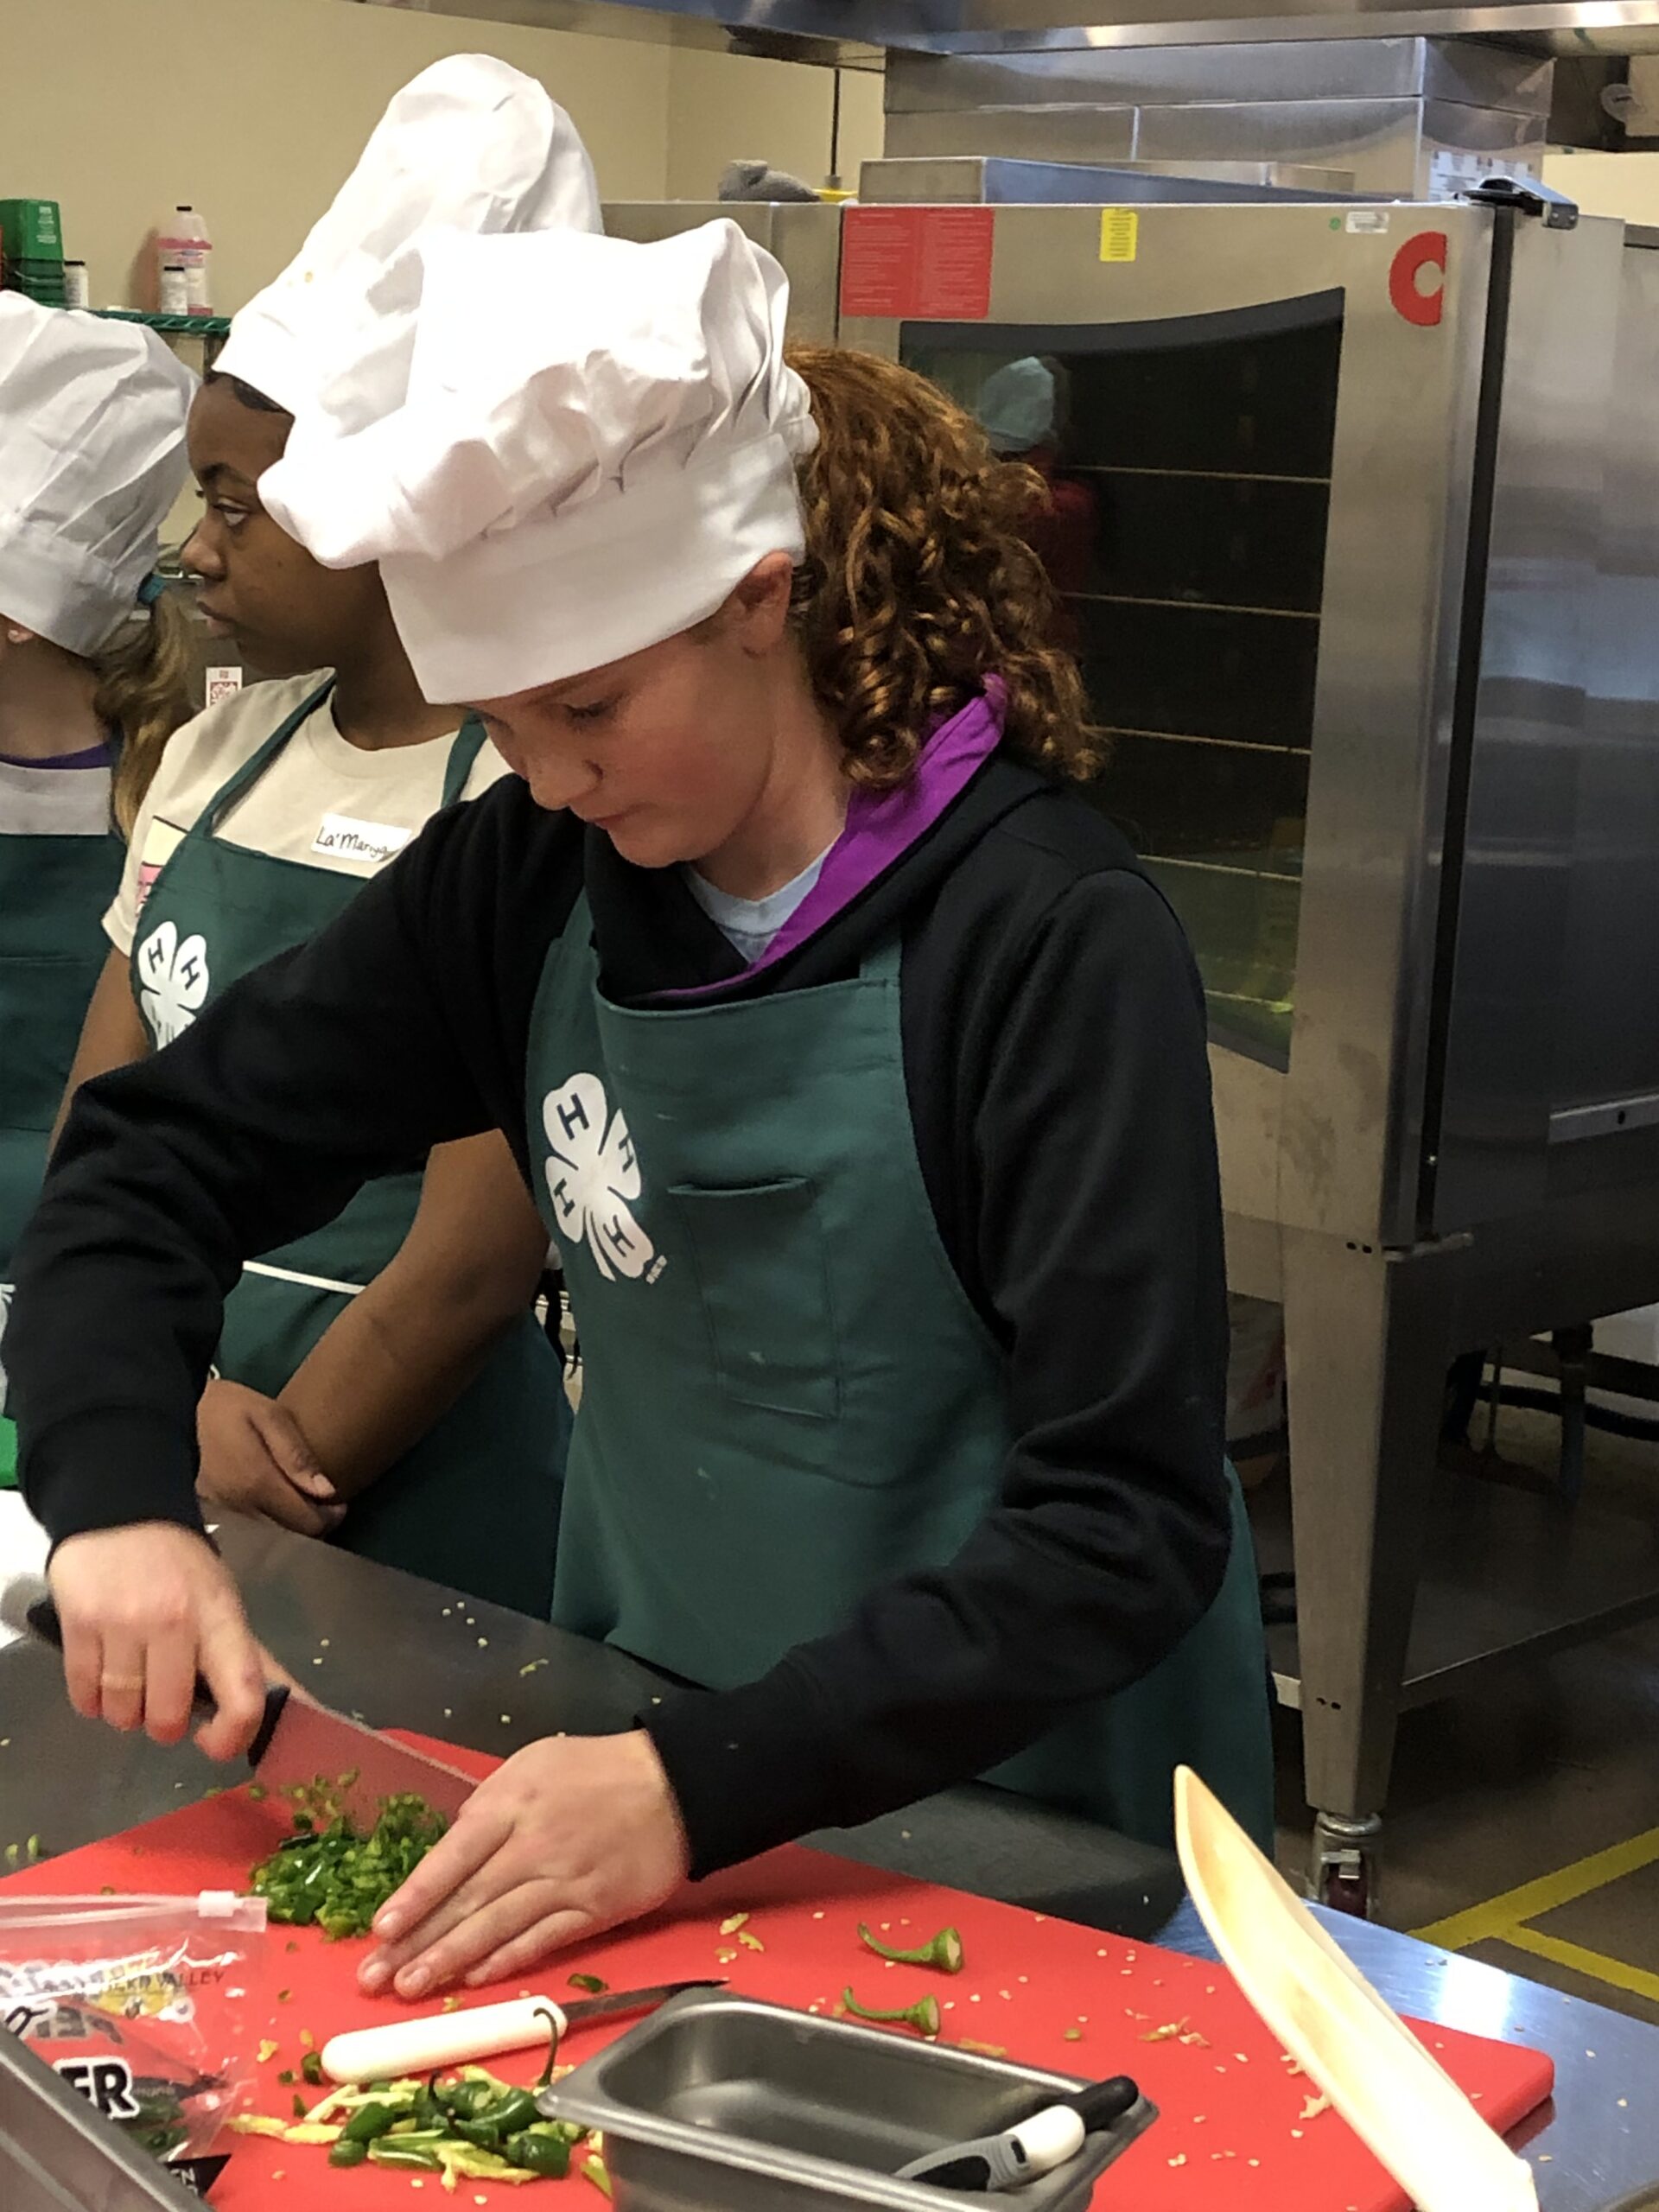 Summit helps equip youth across SC with culinary skills, nutrition training